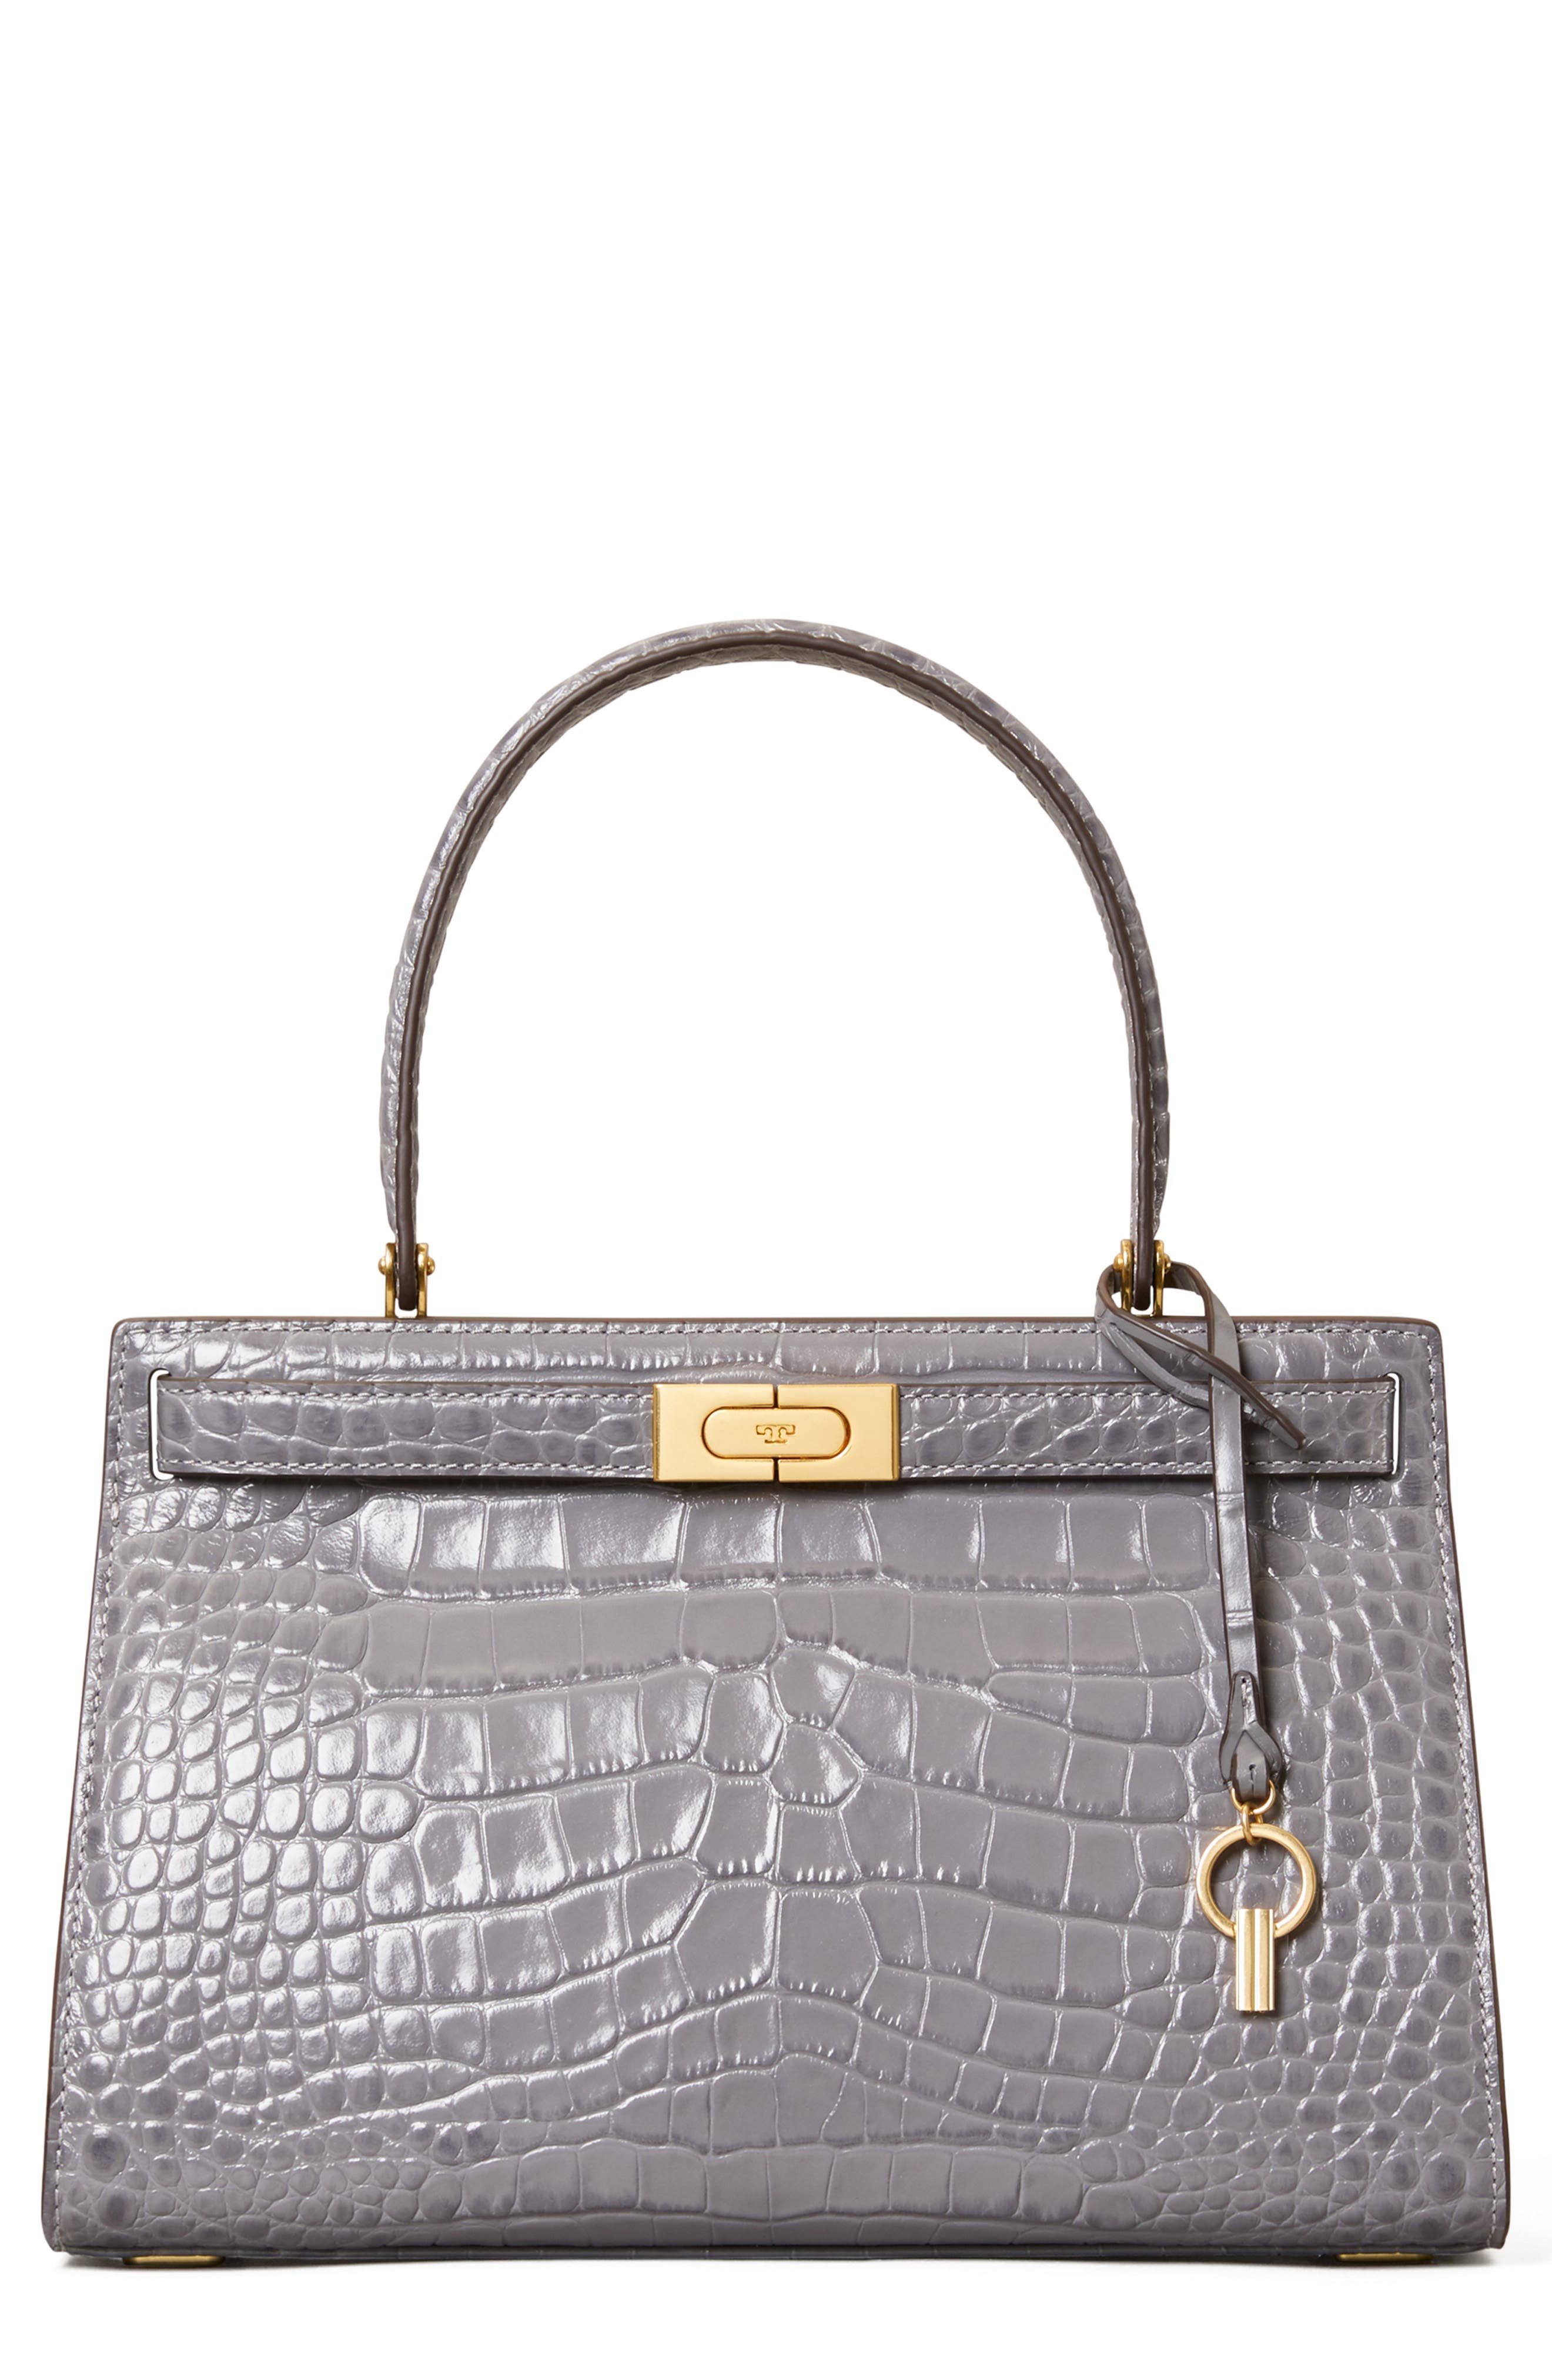 Tory Burch Lee Radziwill Croc Embossed Small Leather Satchel in Zinc